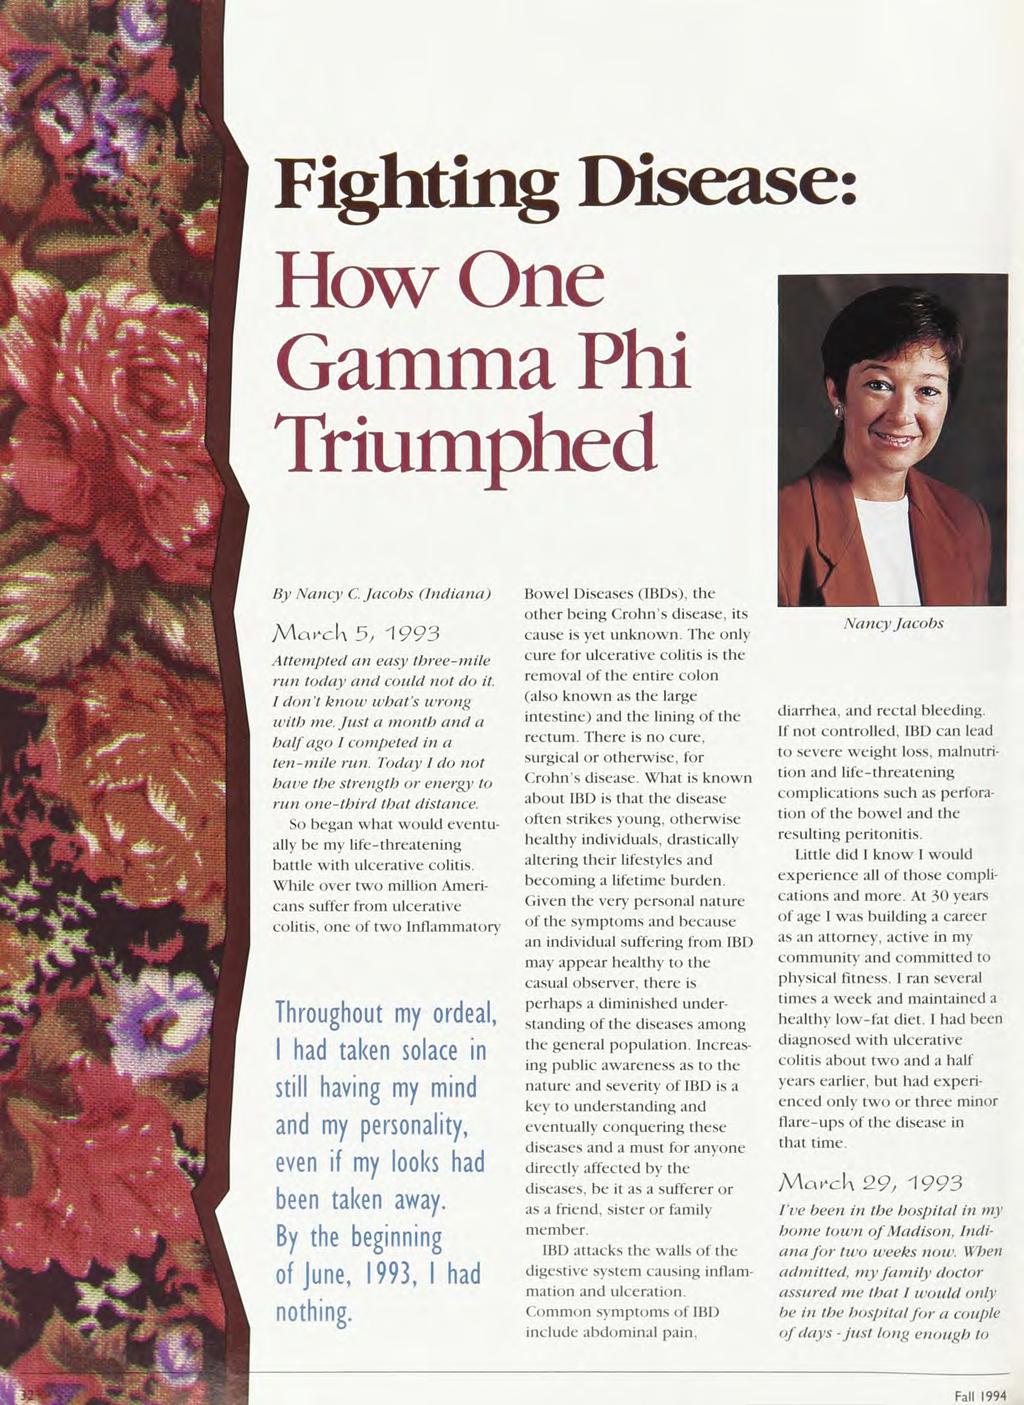 Fall 1994 Fighting Disease: How One Gamma Phi Triumphed By Nancy C. Jacobs (Indiana) Attempted an easy threemile run today and could not do it. 1 don't know ivhat's wrong with me.